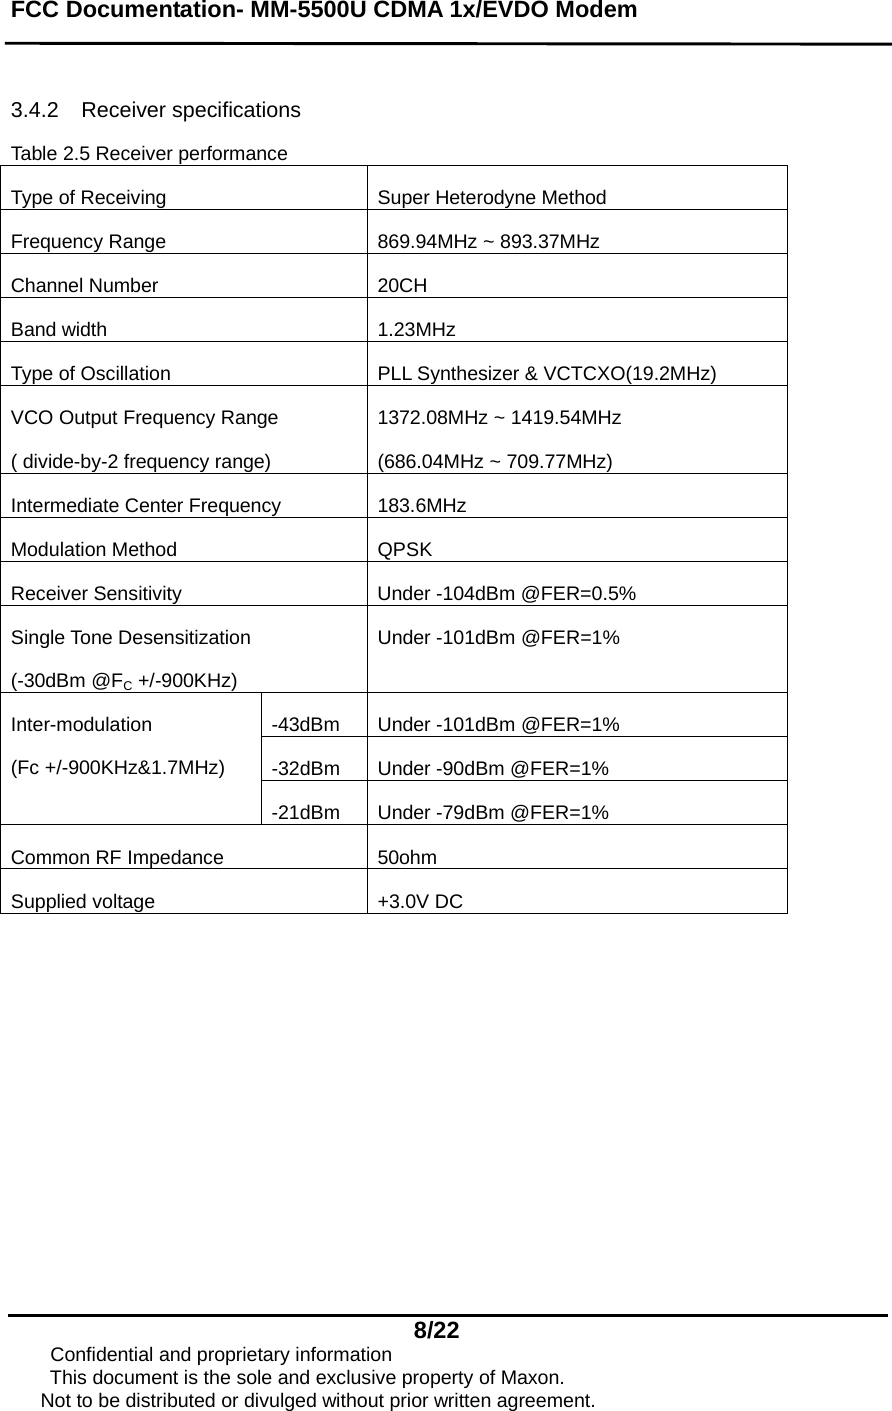 FCC Documentation- MM-5500U CDMA 1x/EVDO Modem   8/22      Confidential and proprietary information This document is the sole and exclusive property of Maxon.       Not to be distributed or divulged without prior written agreement.  3.4.2 Receiver specifications Table 2.5 Receiver performance Type of Receiving  Super Heterodyne Method Frequency Range  869.94MHz ~ 893.37MHz Channel Number  20CH Band width  1.23MHz Type of Oscillation  PLL Synthesizer &amp; VCTCXO(19.2MHz) VCO Output Frequency Range ( divide-by-2 frequency range) 1372.08MHz ~ 1419.54MHz (686.04MHz ~ 709.77MHz) Intermediate Center Frequency  183.6MHz Modulation Method  QPSK Receiver Sensitivity  Under -104dBm @FER=0.5% Single Tone Desensitization (-30dBm @FC +/-900KHz) Under -101dBm @FER=1% -43dBm Under -101dBm @FER=1% -32dBm  Under -90dBm @FER=1% Inter-modulation  (Fc +/-900KHz&amp;1.7MHz) -21dBm  Under -79dBm @FER=1% Common RF Impedance  50ohm Supplied voltage  +3.0V DC 